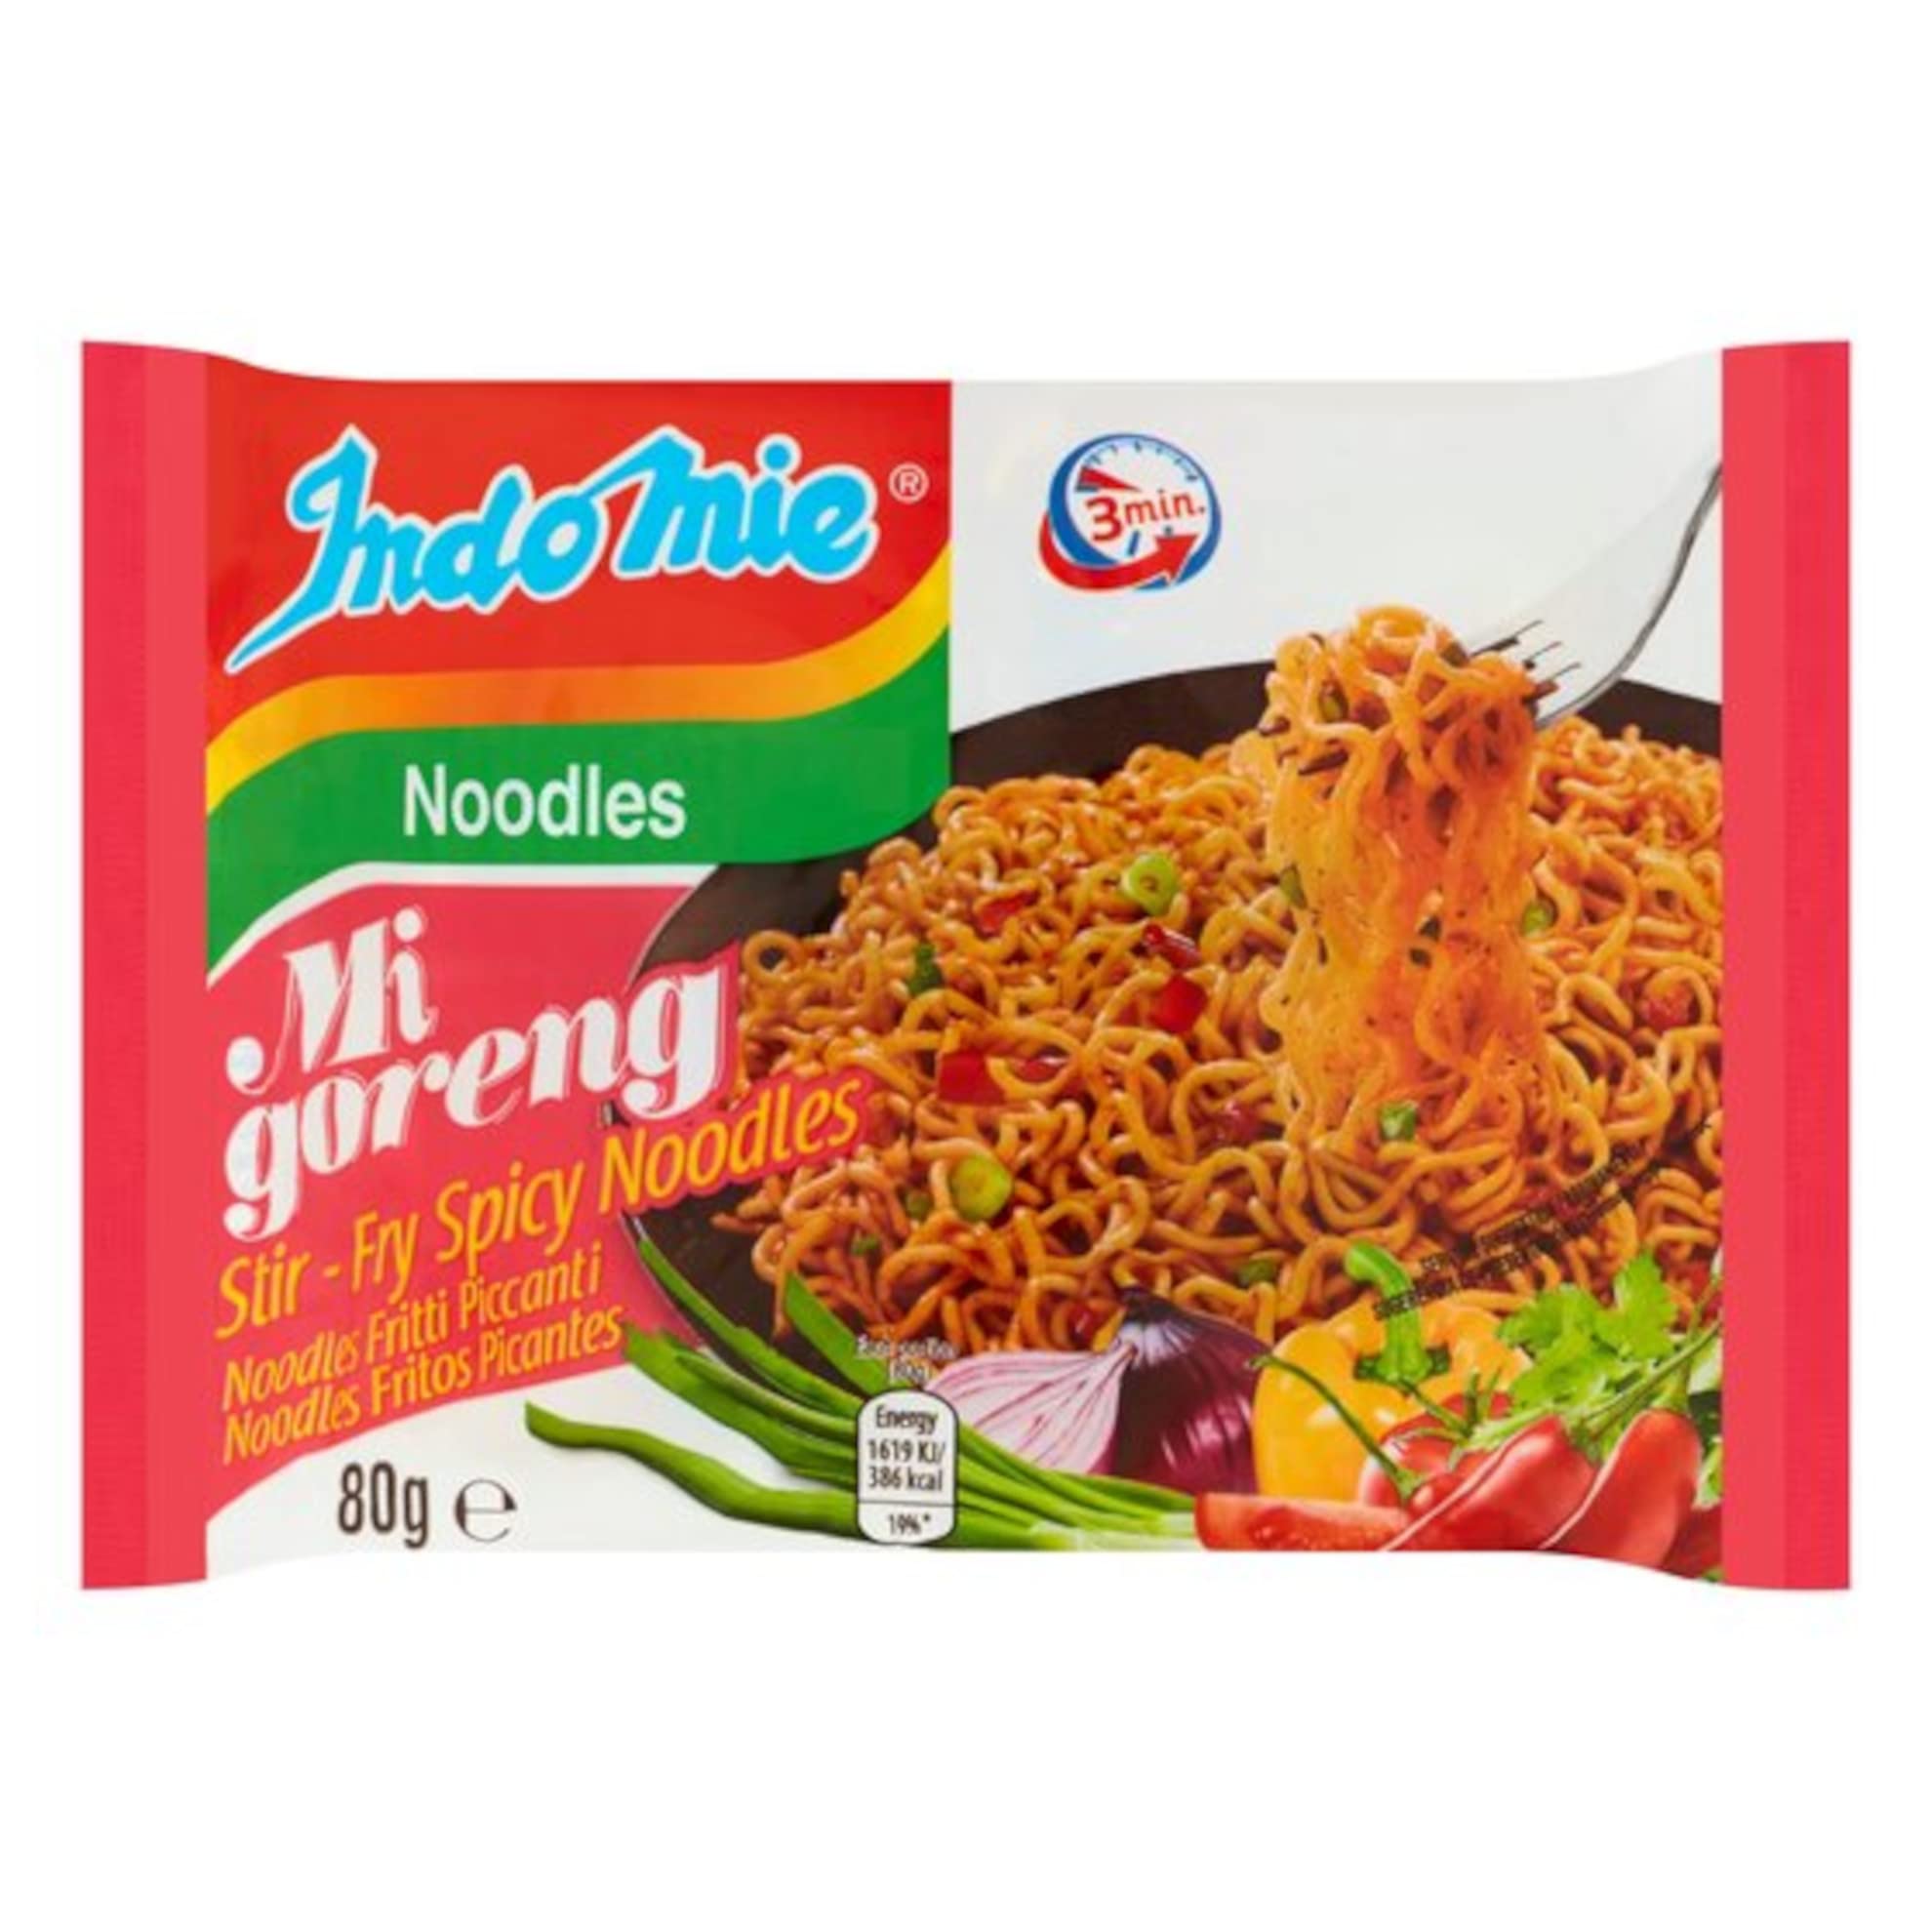 Indomie Mi Goreng Instant Stir Fry Noodles, $14.37 with 15% S&S, $16.06 w/5% S&S (Pack of 30) Halal Certified, Hot & Spicy / Pedas Flavor 2.82 Ounce at Amazon